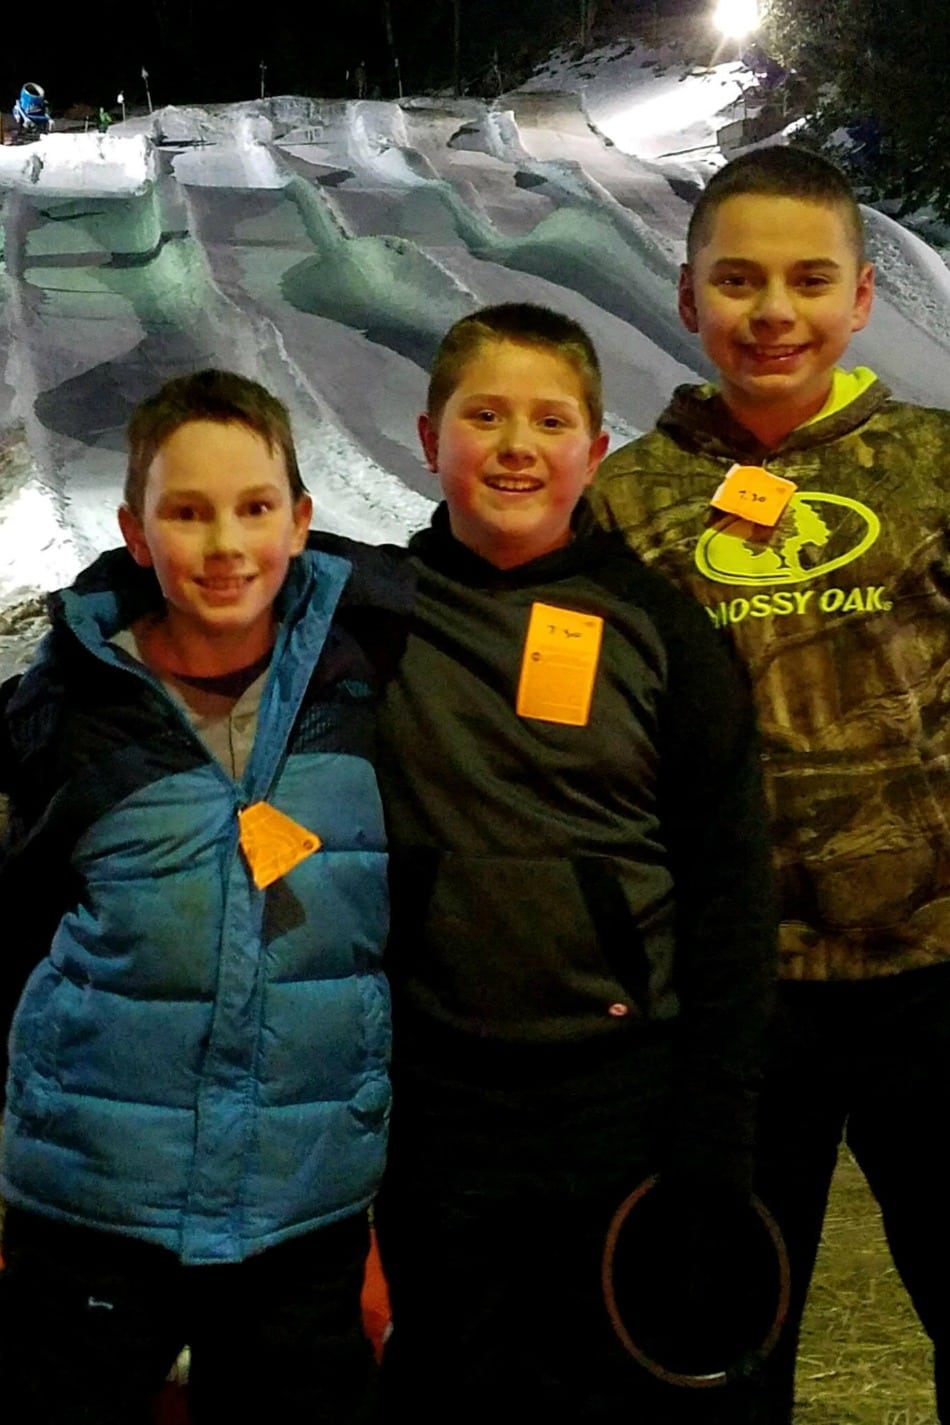 Snow Tubing & Connecting With Others | Growing Up Herbal | We recently took a trip to Jonas Ridge Snow Tubing Park to have some fun and connect with others OUTSIDE of the Internet. Read all about it!